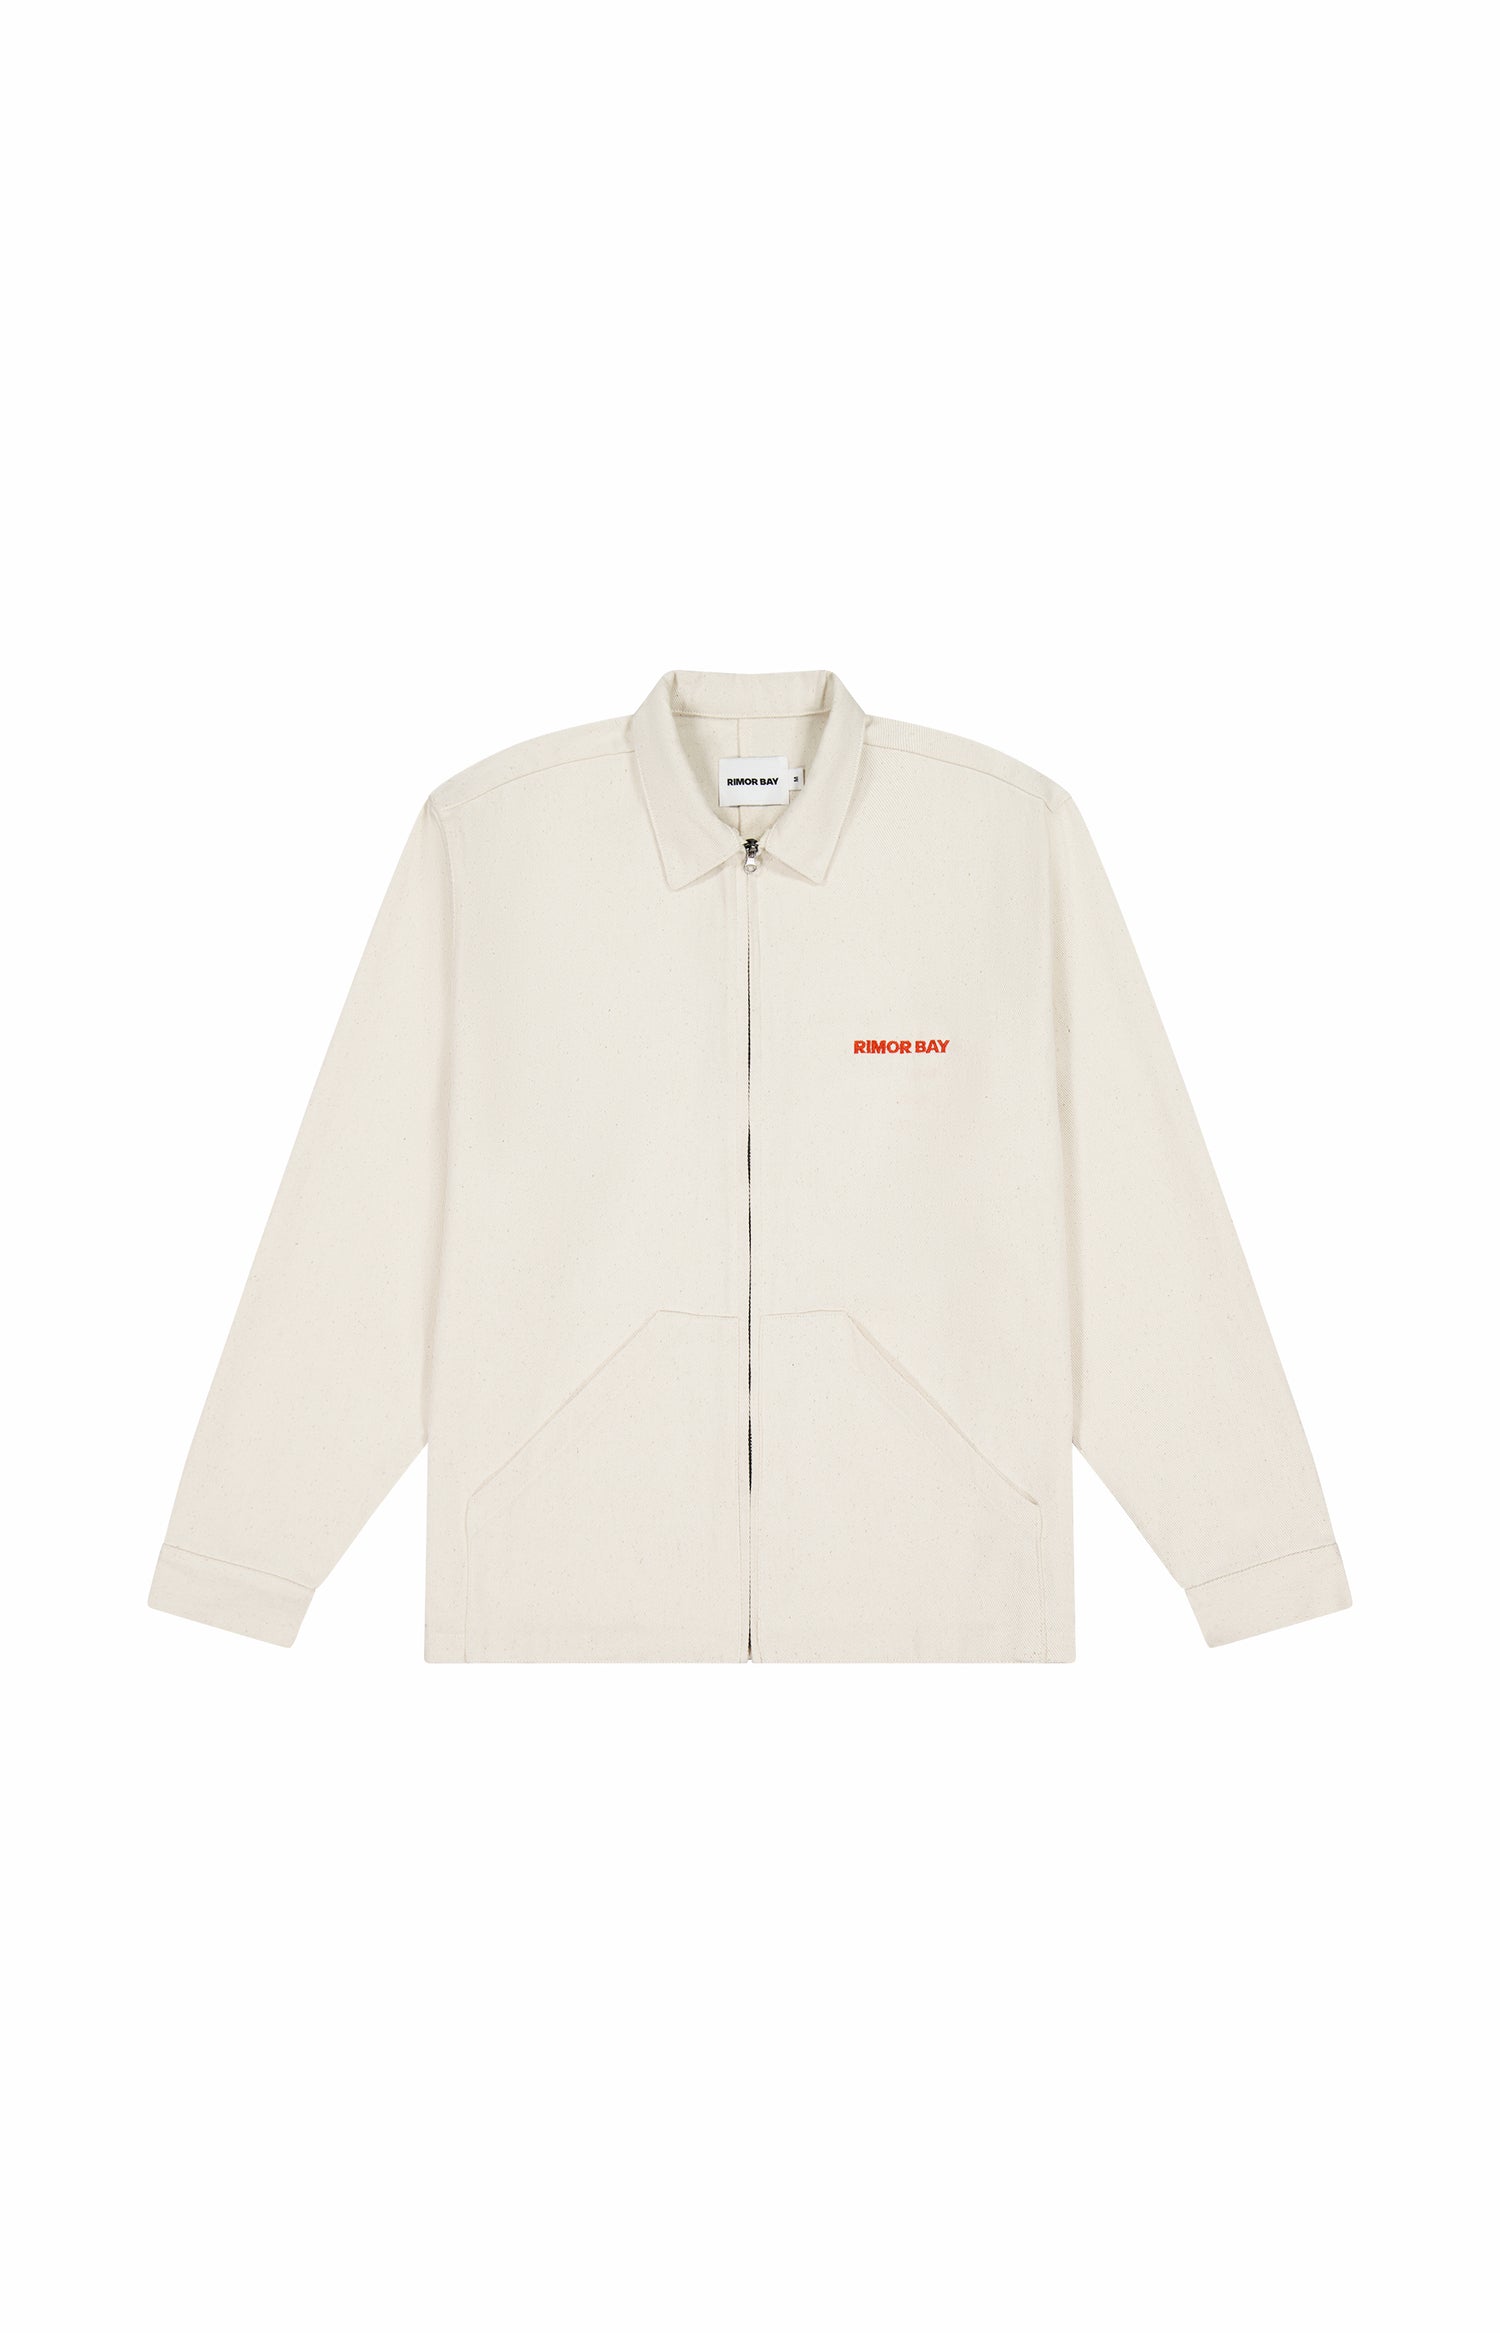 front of long sleeve off-white zip up jacket with logo on chest and front pockets